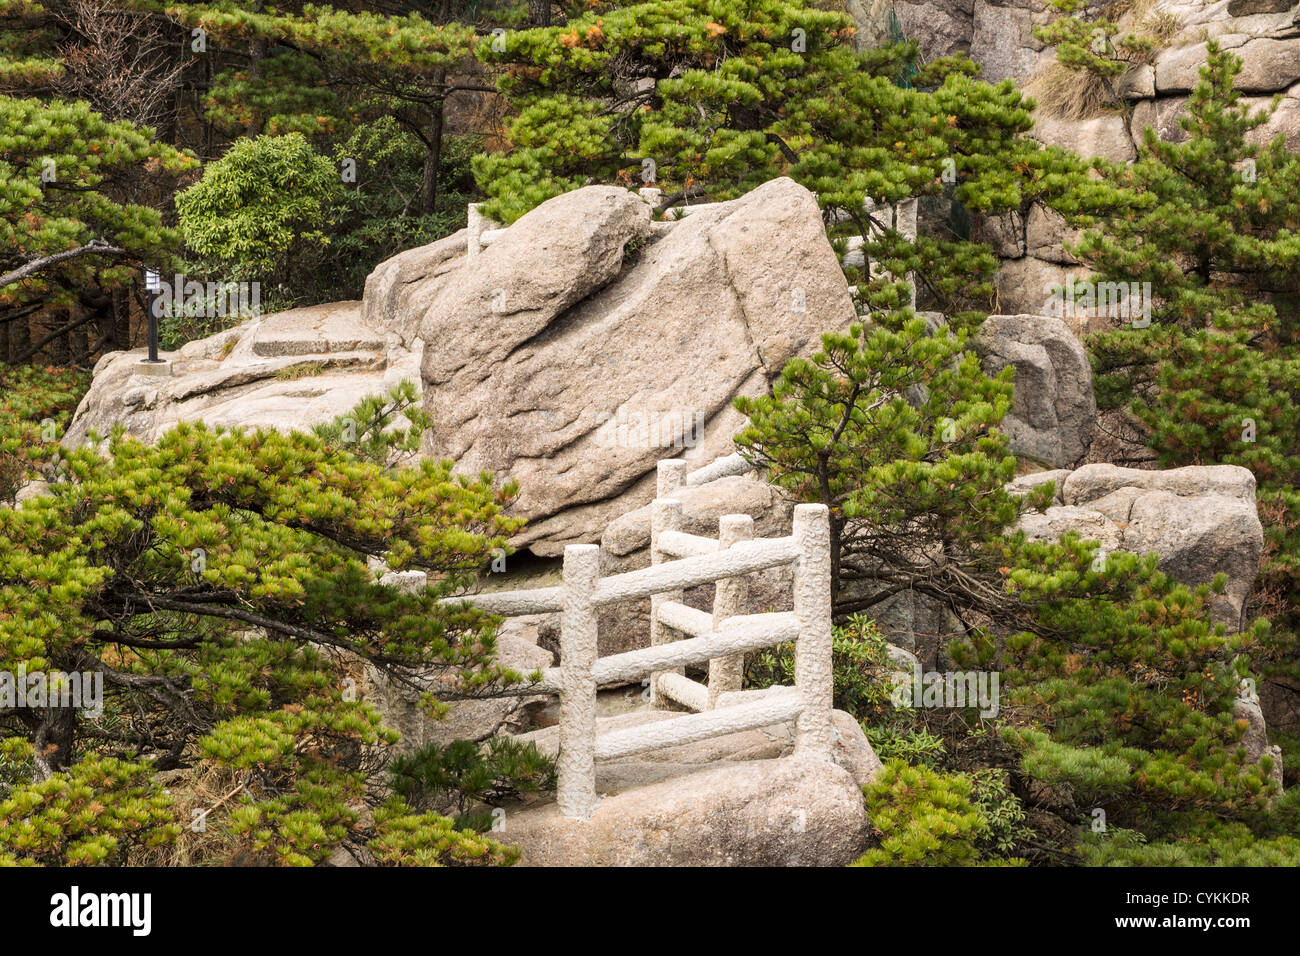 Stone platform in Yellow Mountain park with trees and rocks in background Stock Photo